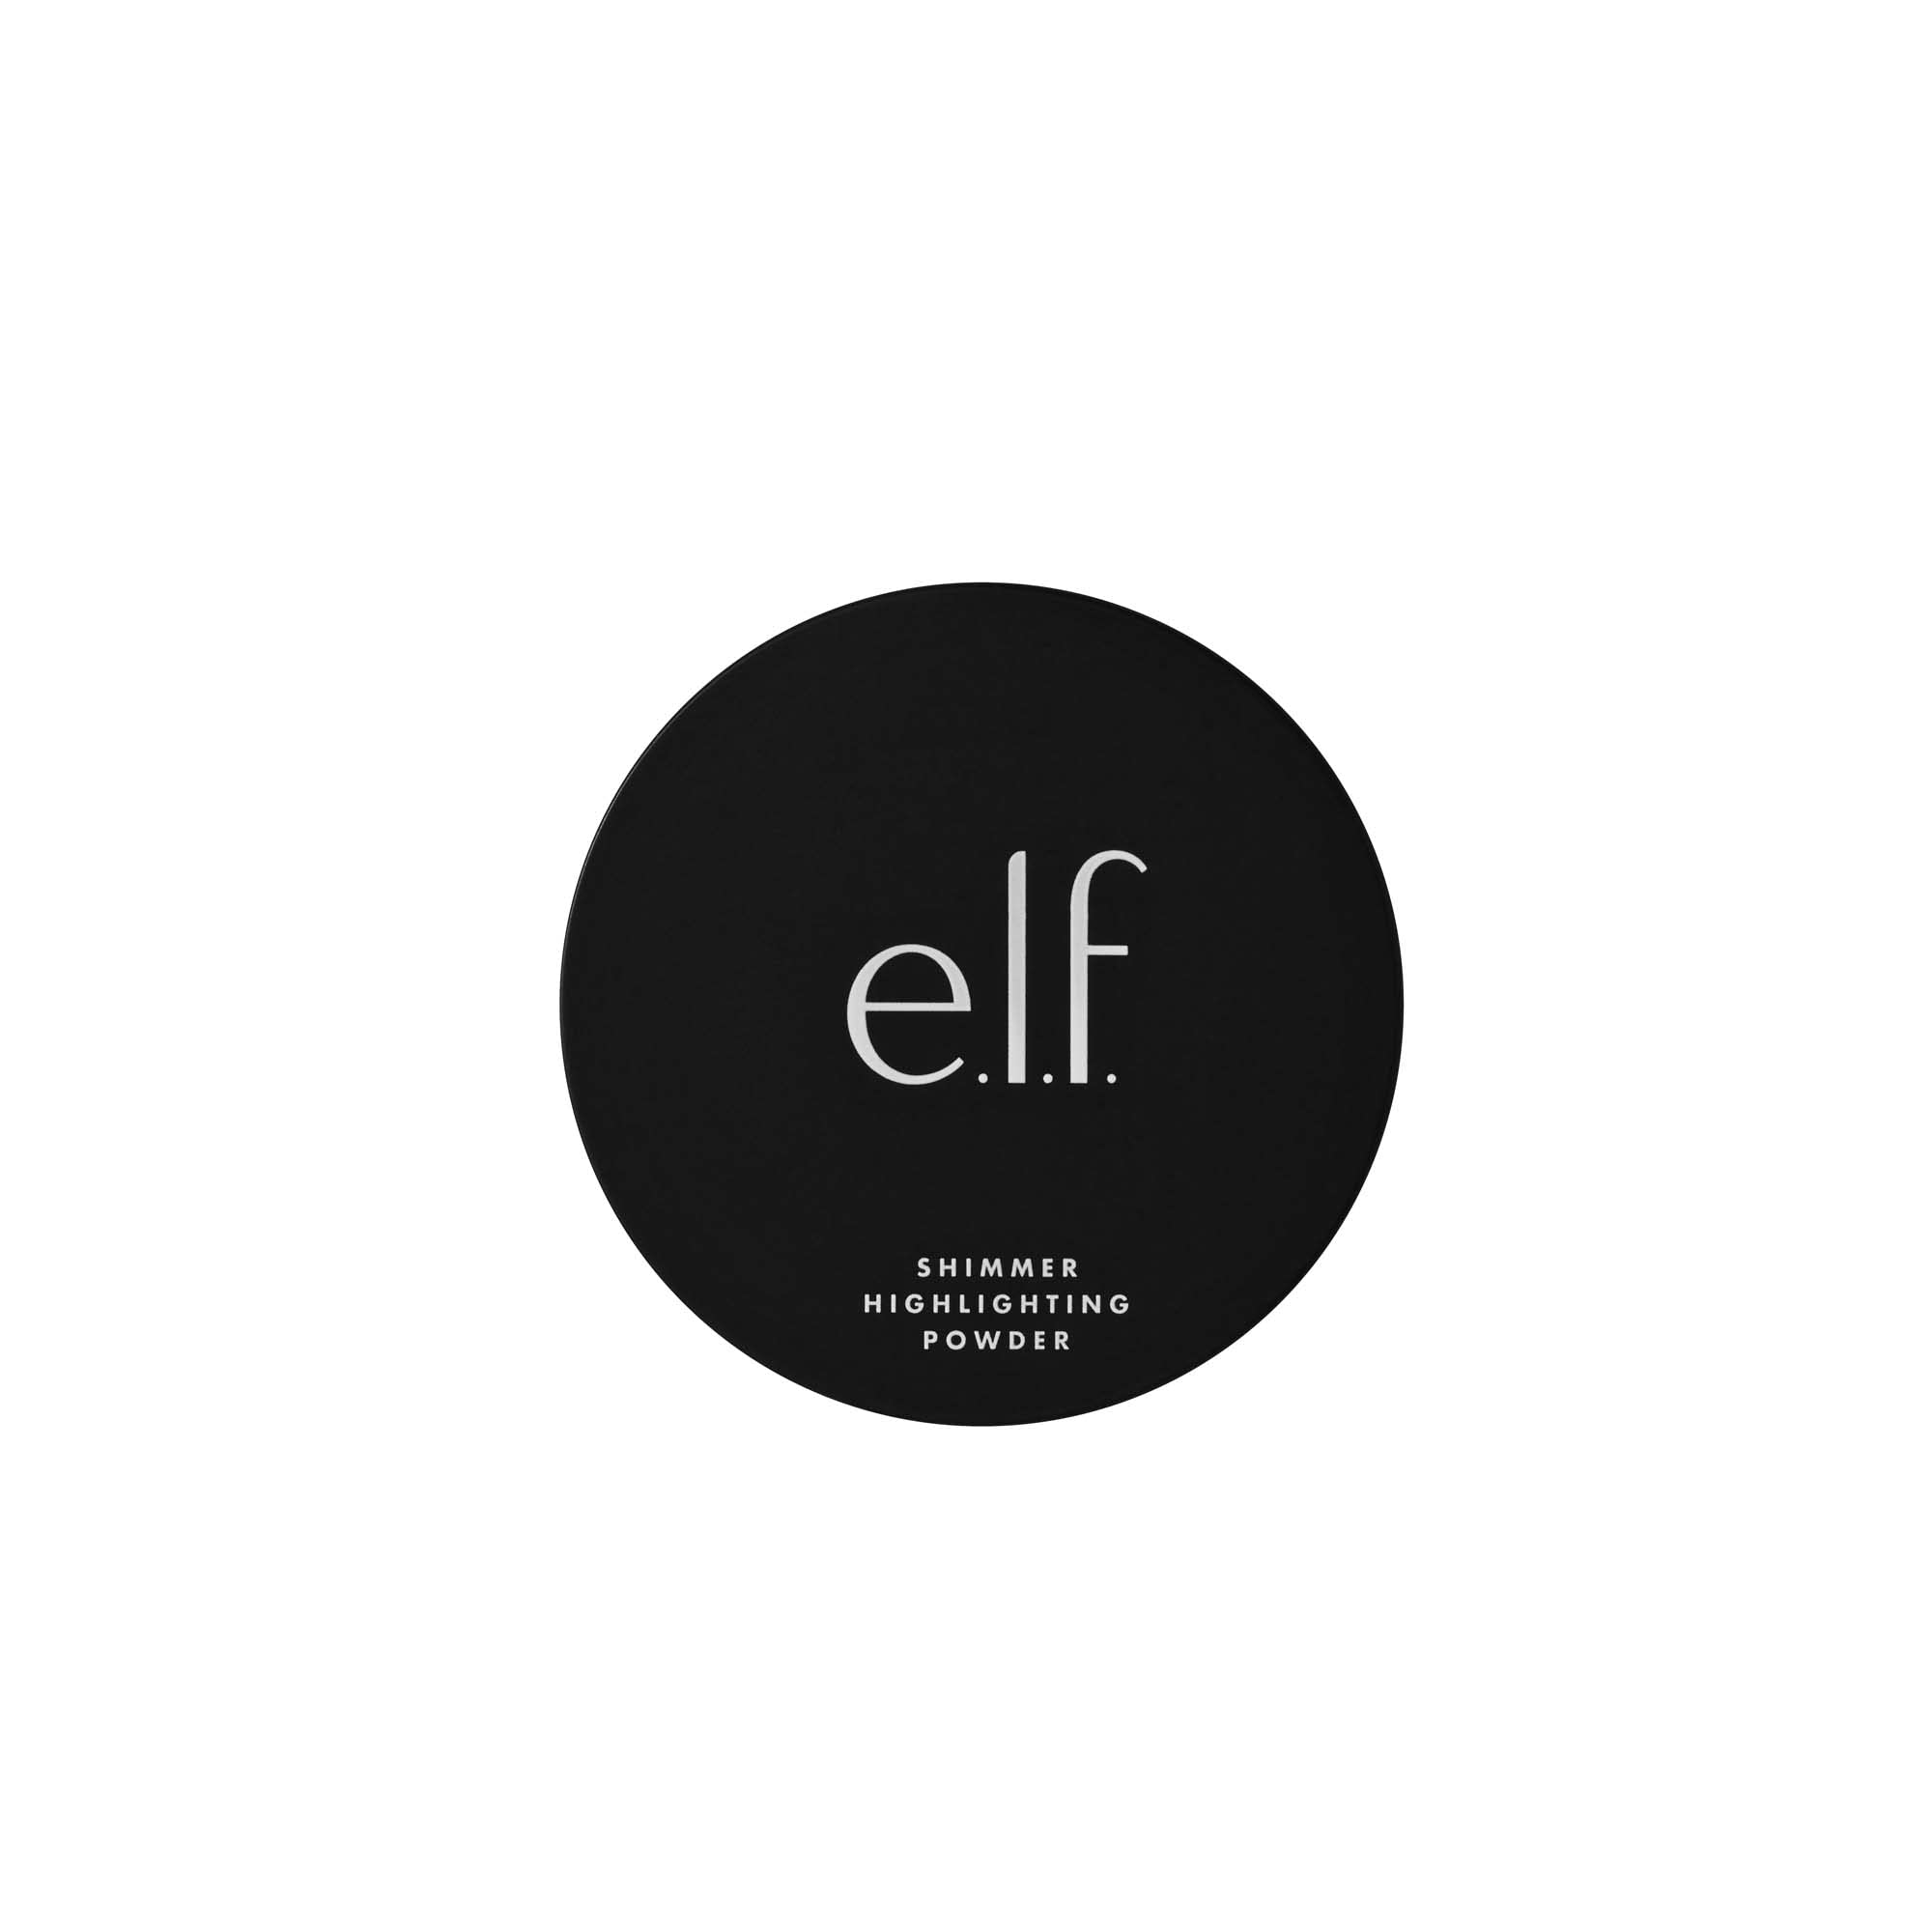 e.l.f., Perfect Finish HD Powder, Convenient, Portable Compact, Fills Fine Lines, Blurs Imperfections, Soft, Smooth Finish, Anytime Wear, 0.28 Oz